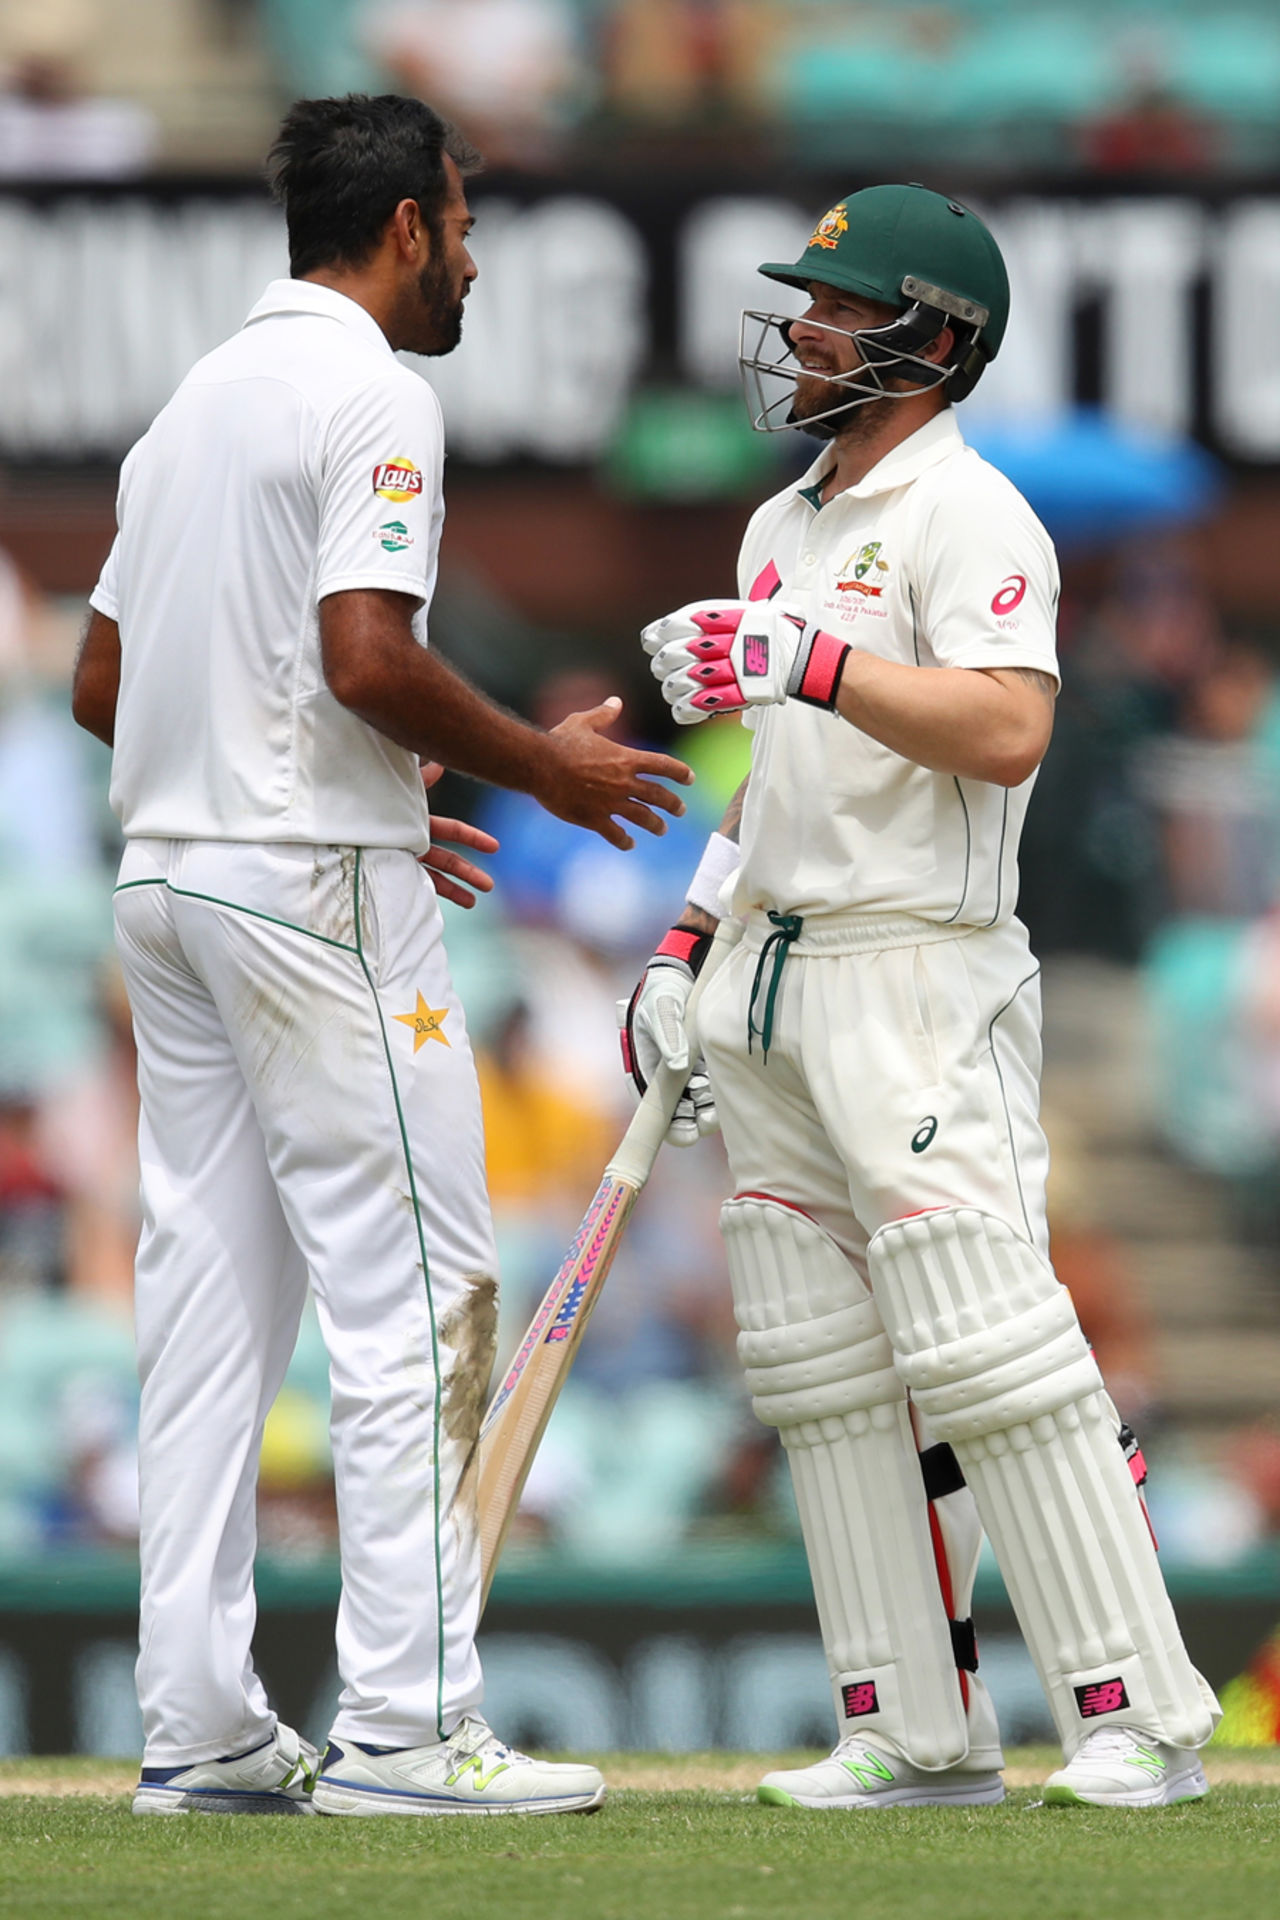 Wahab Riaz and Matthew Wade have a word with each other, Australia v Pakistan, 3rd Test, Sydney, 2nd day, January 4, 2017